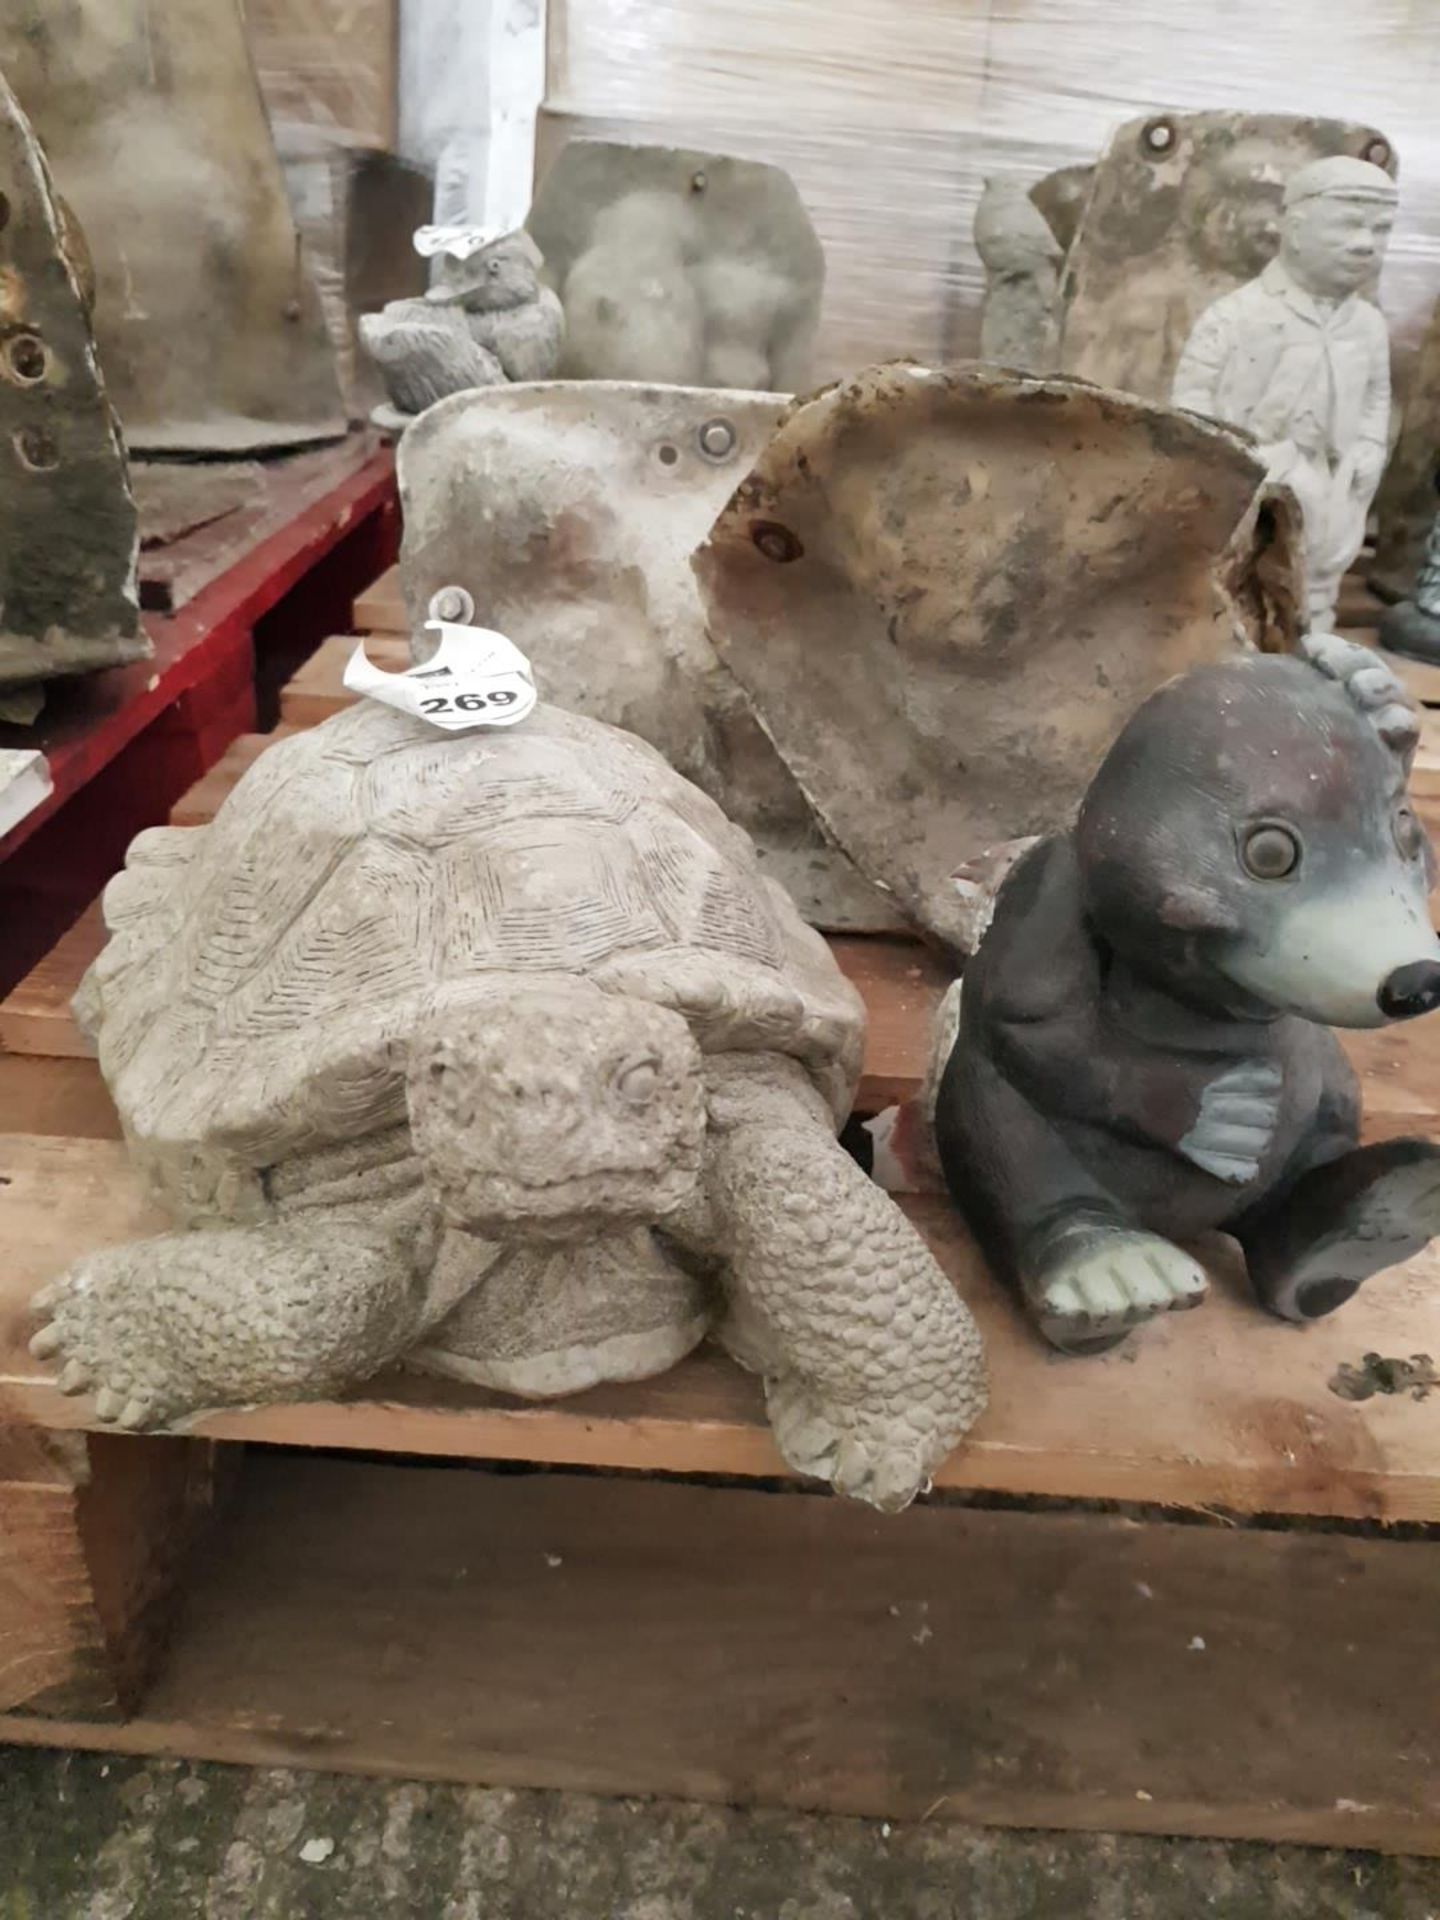 2 X GARDEN ORNAMENTS I.E TORTOISE AND SLEEPING MOLE WITH FIBRE GLASS MOULDS AND LATEX SLIPS-(